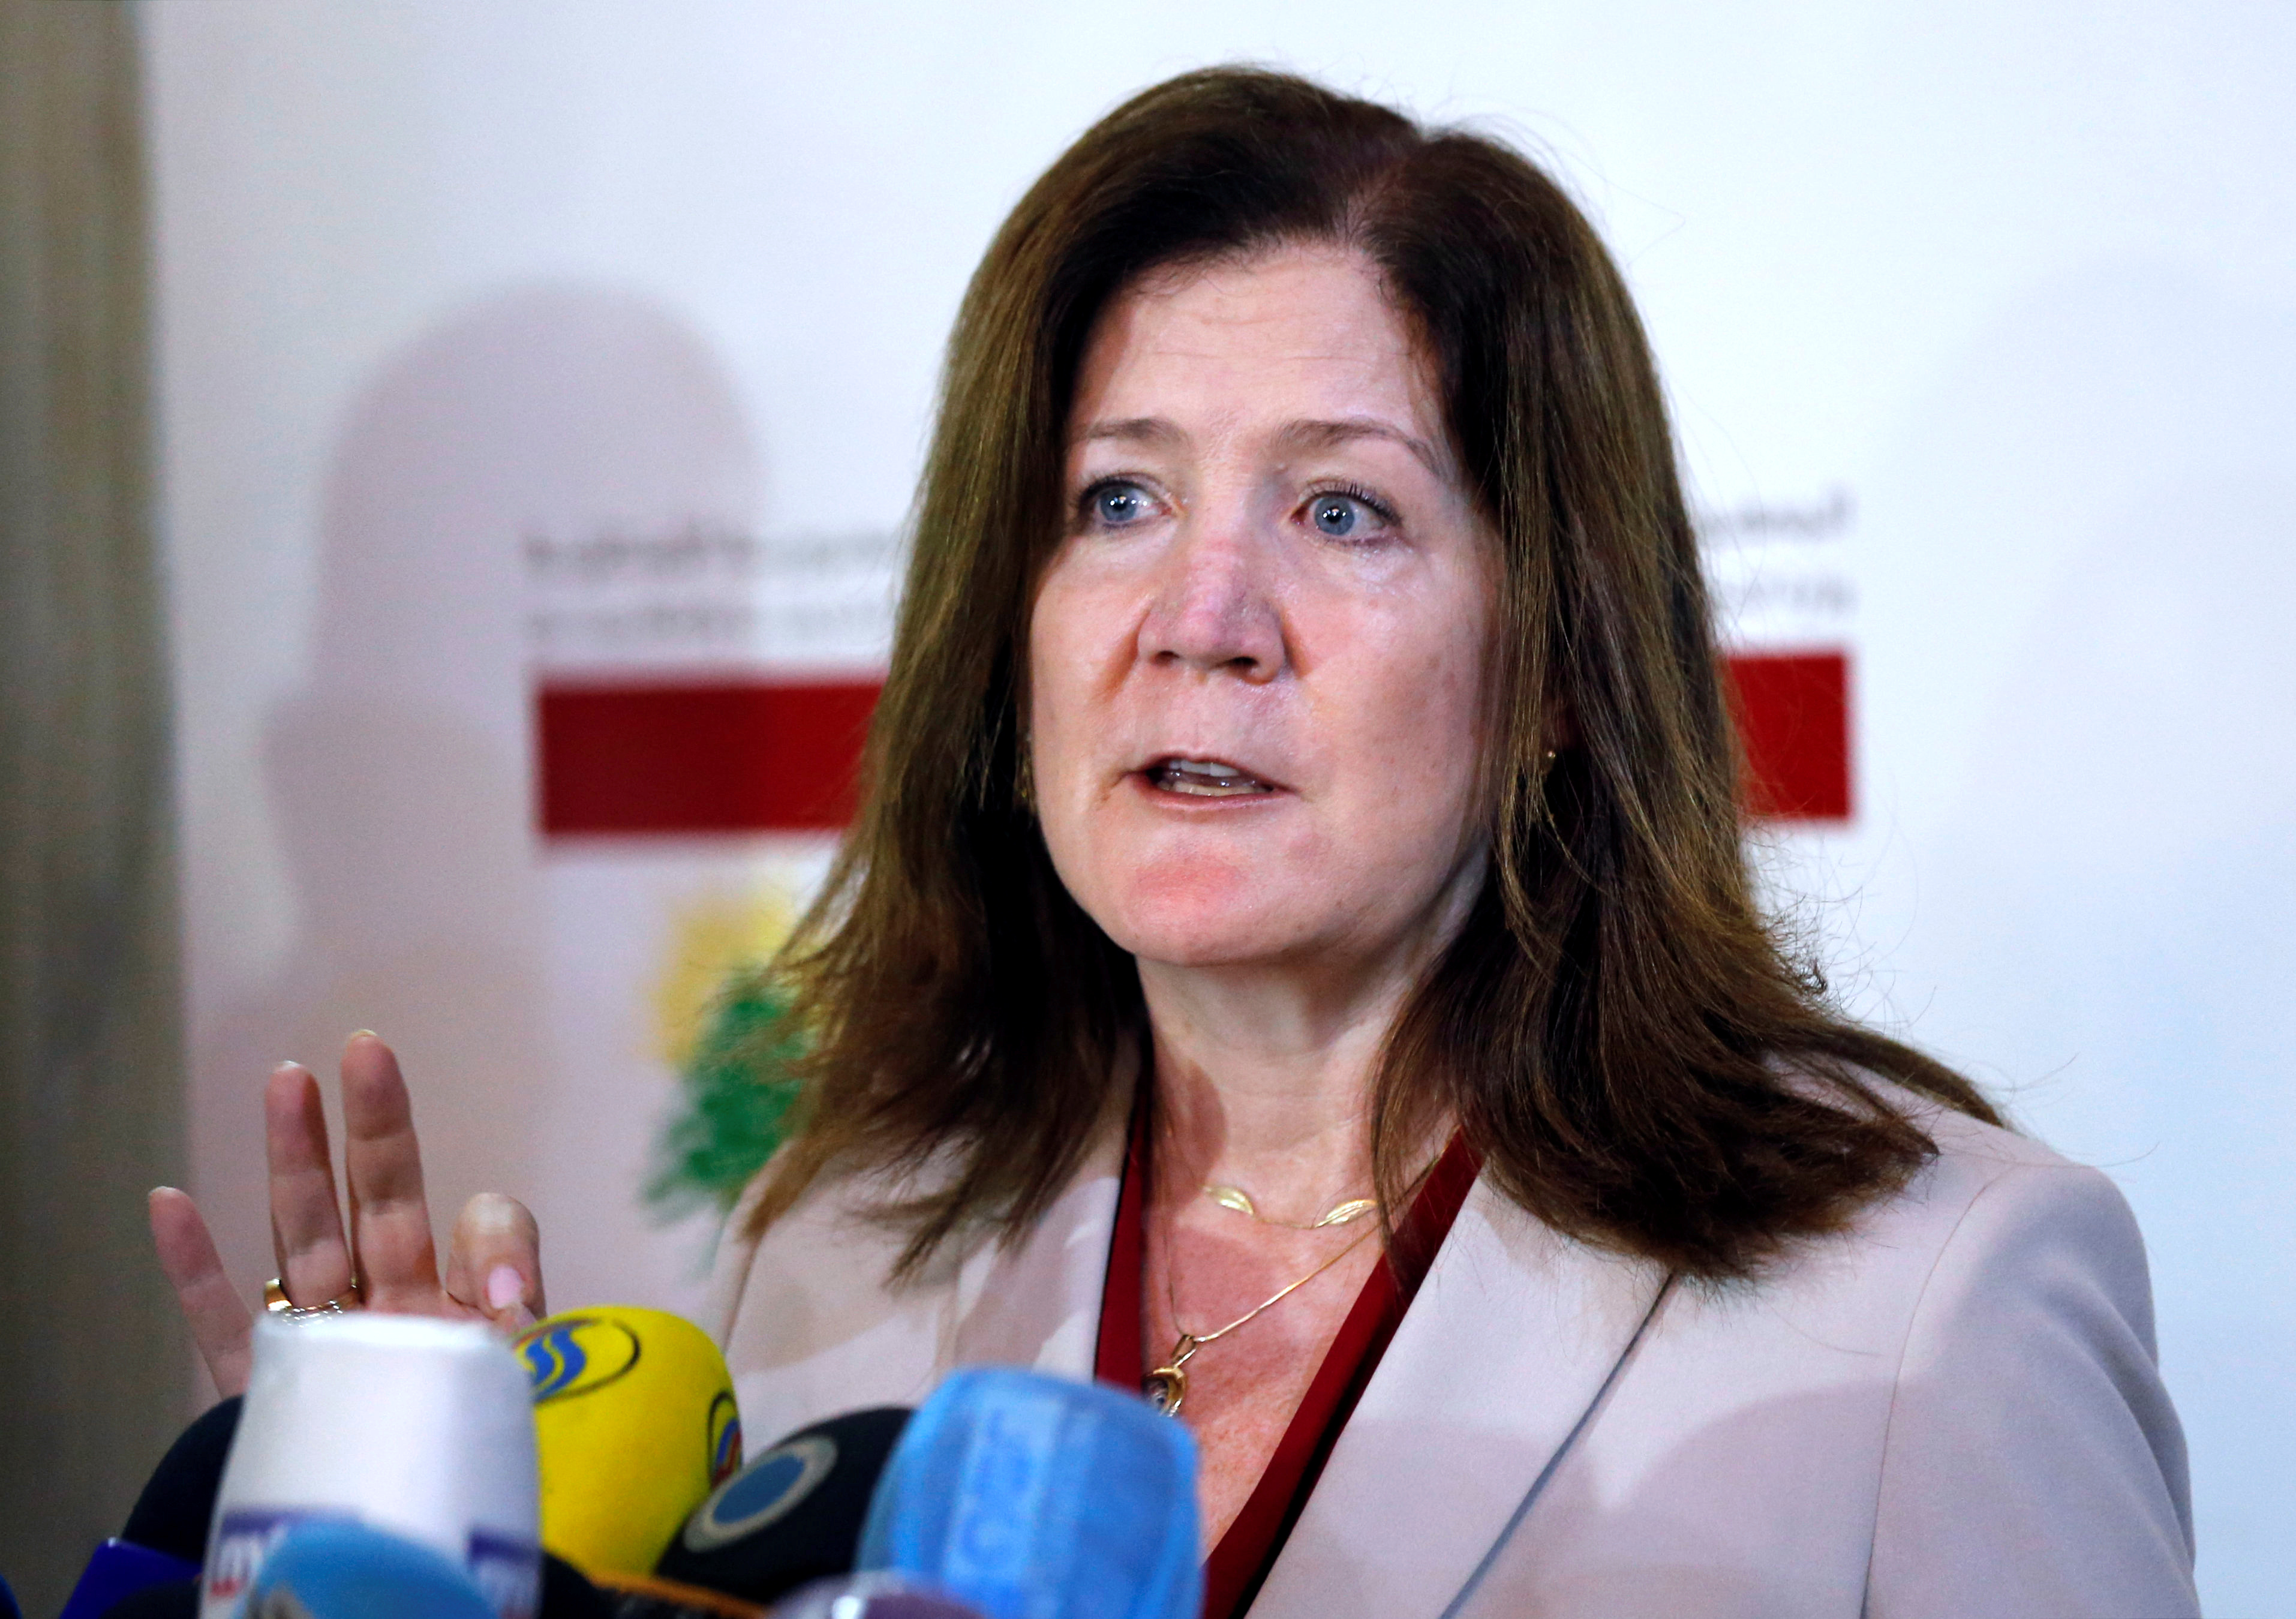 U.S. Ambassador to Lebanon Shea speaks during a news conference after meeting with Lebanon's Foreign Minister Hitti in Beirut